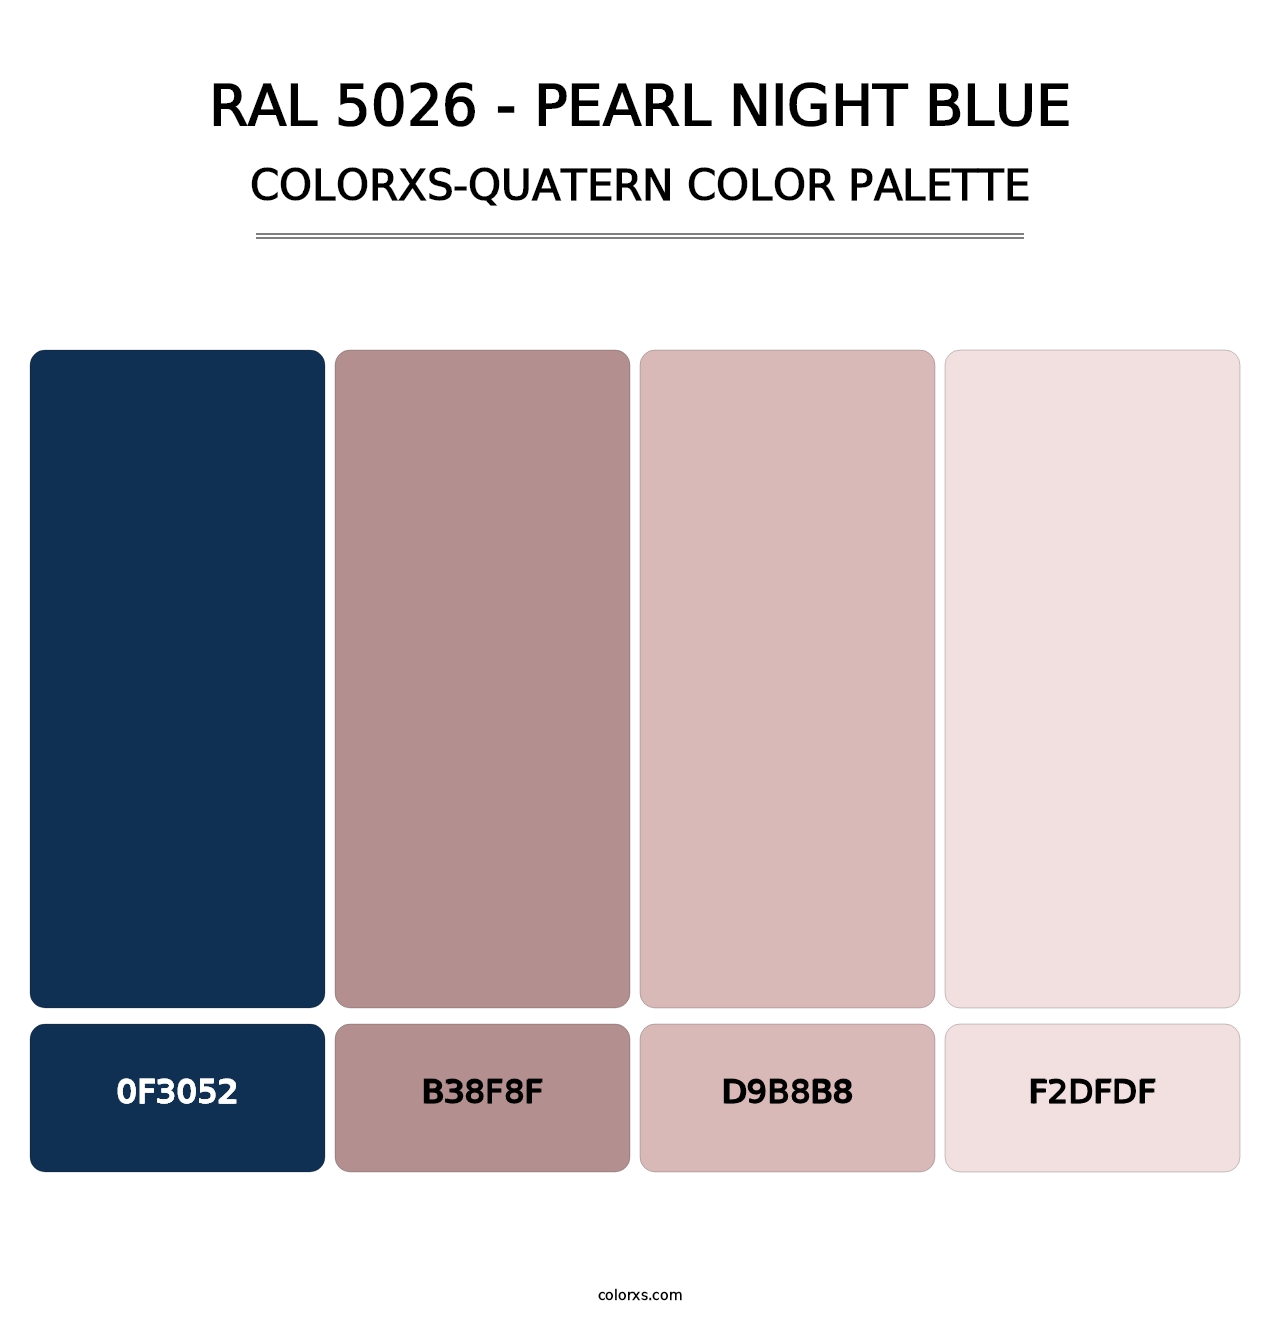 RAL 5026 - Pearl Night Blue - Colorxs Quatern Palette